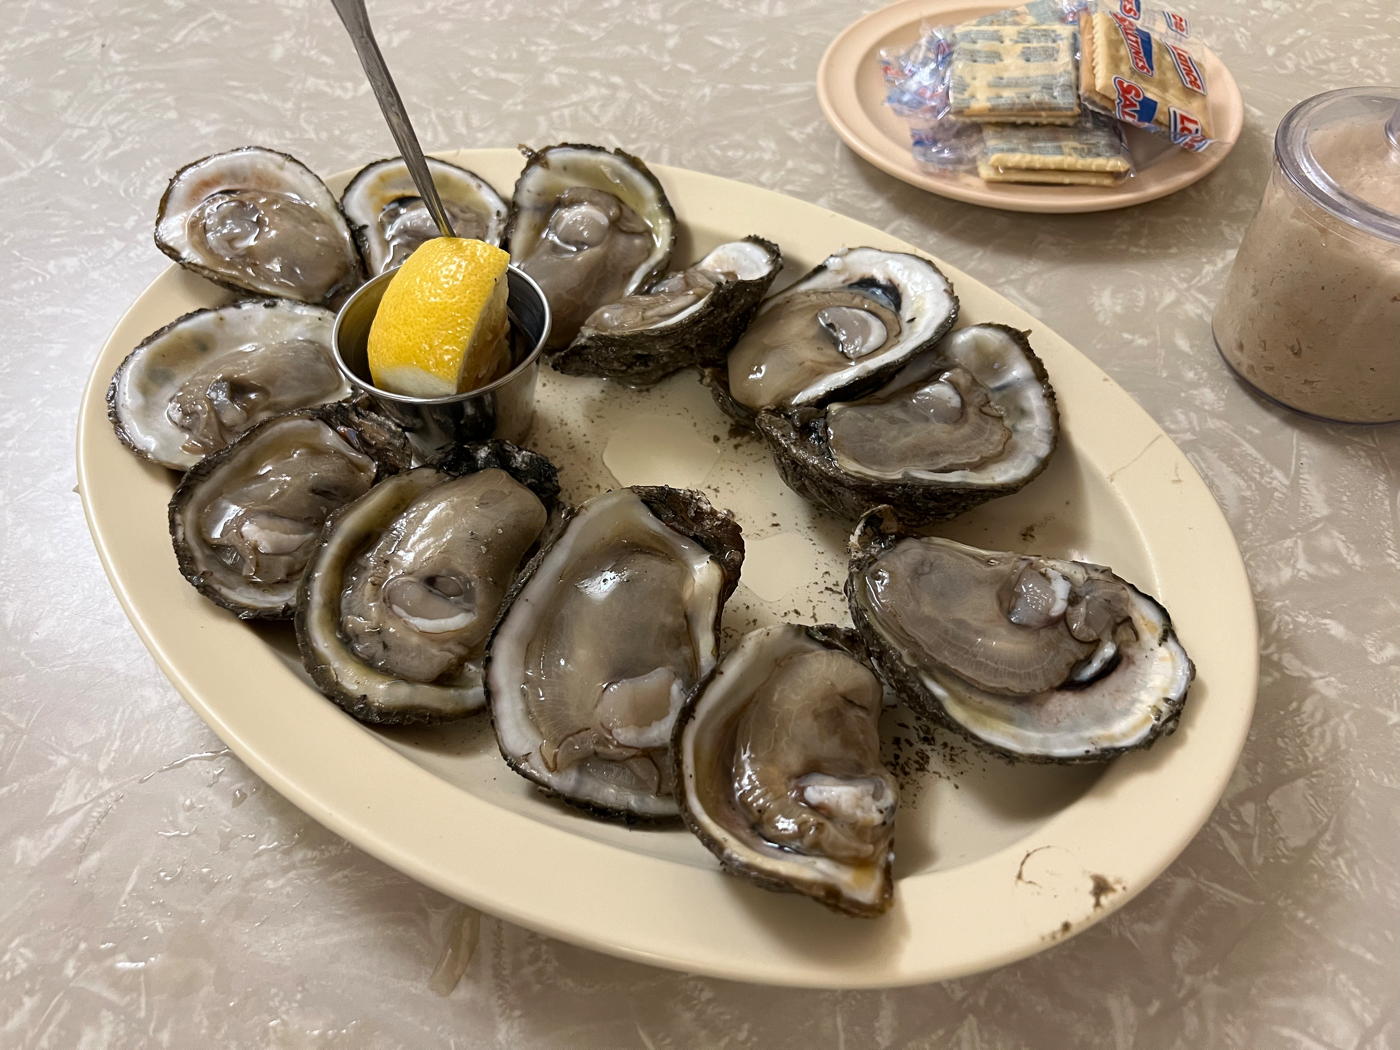 Casamento Oysters: Oysters on the half-shell at Casamento’s in New Orleans.; restaurants; New Orleans; oysters